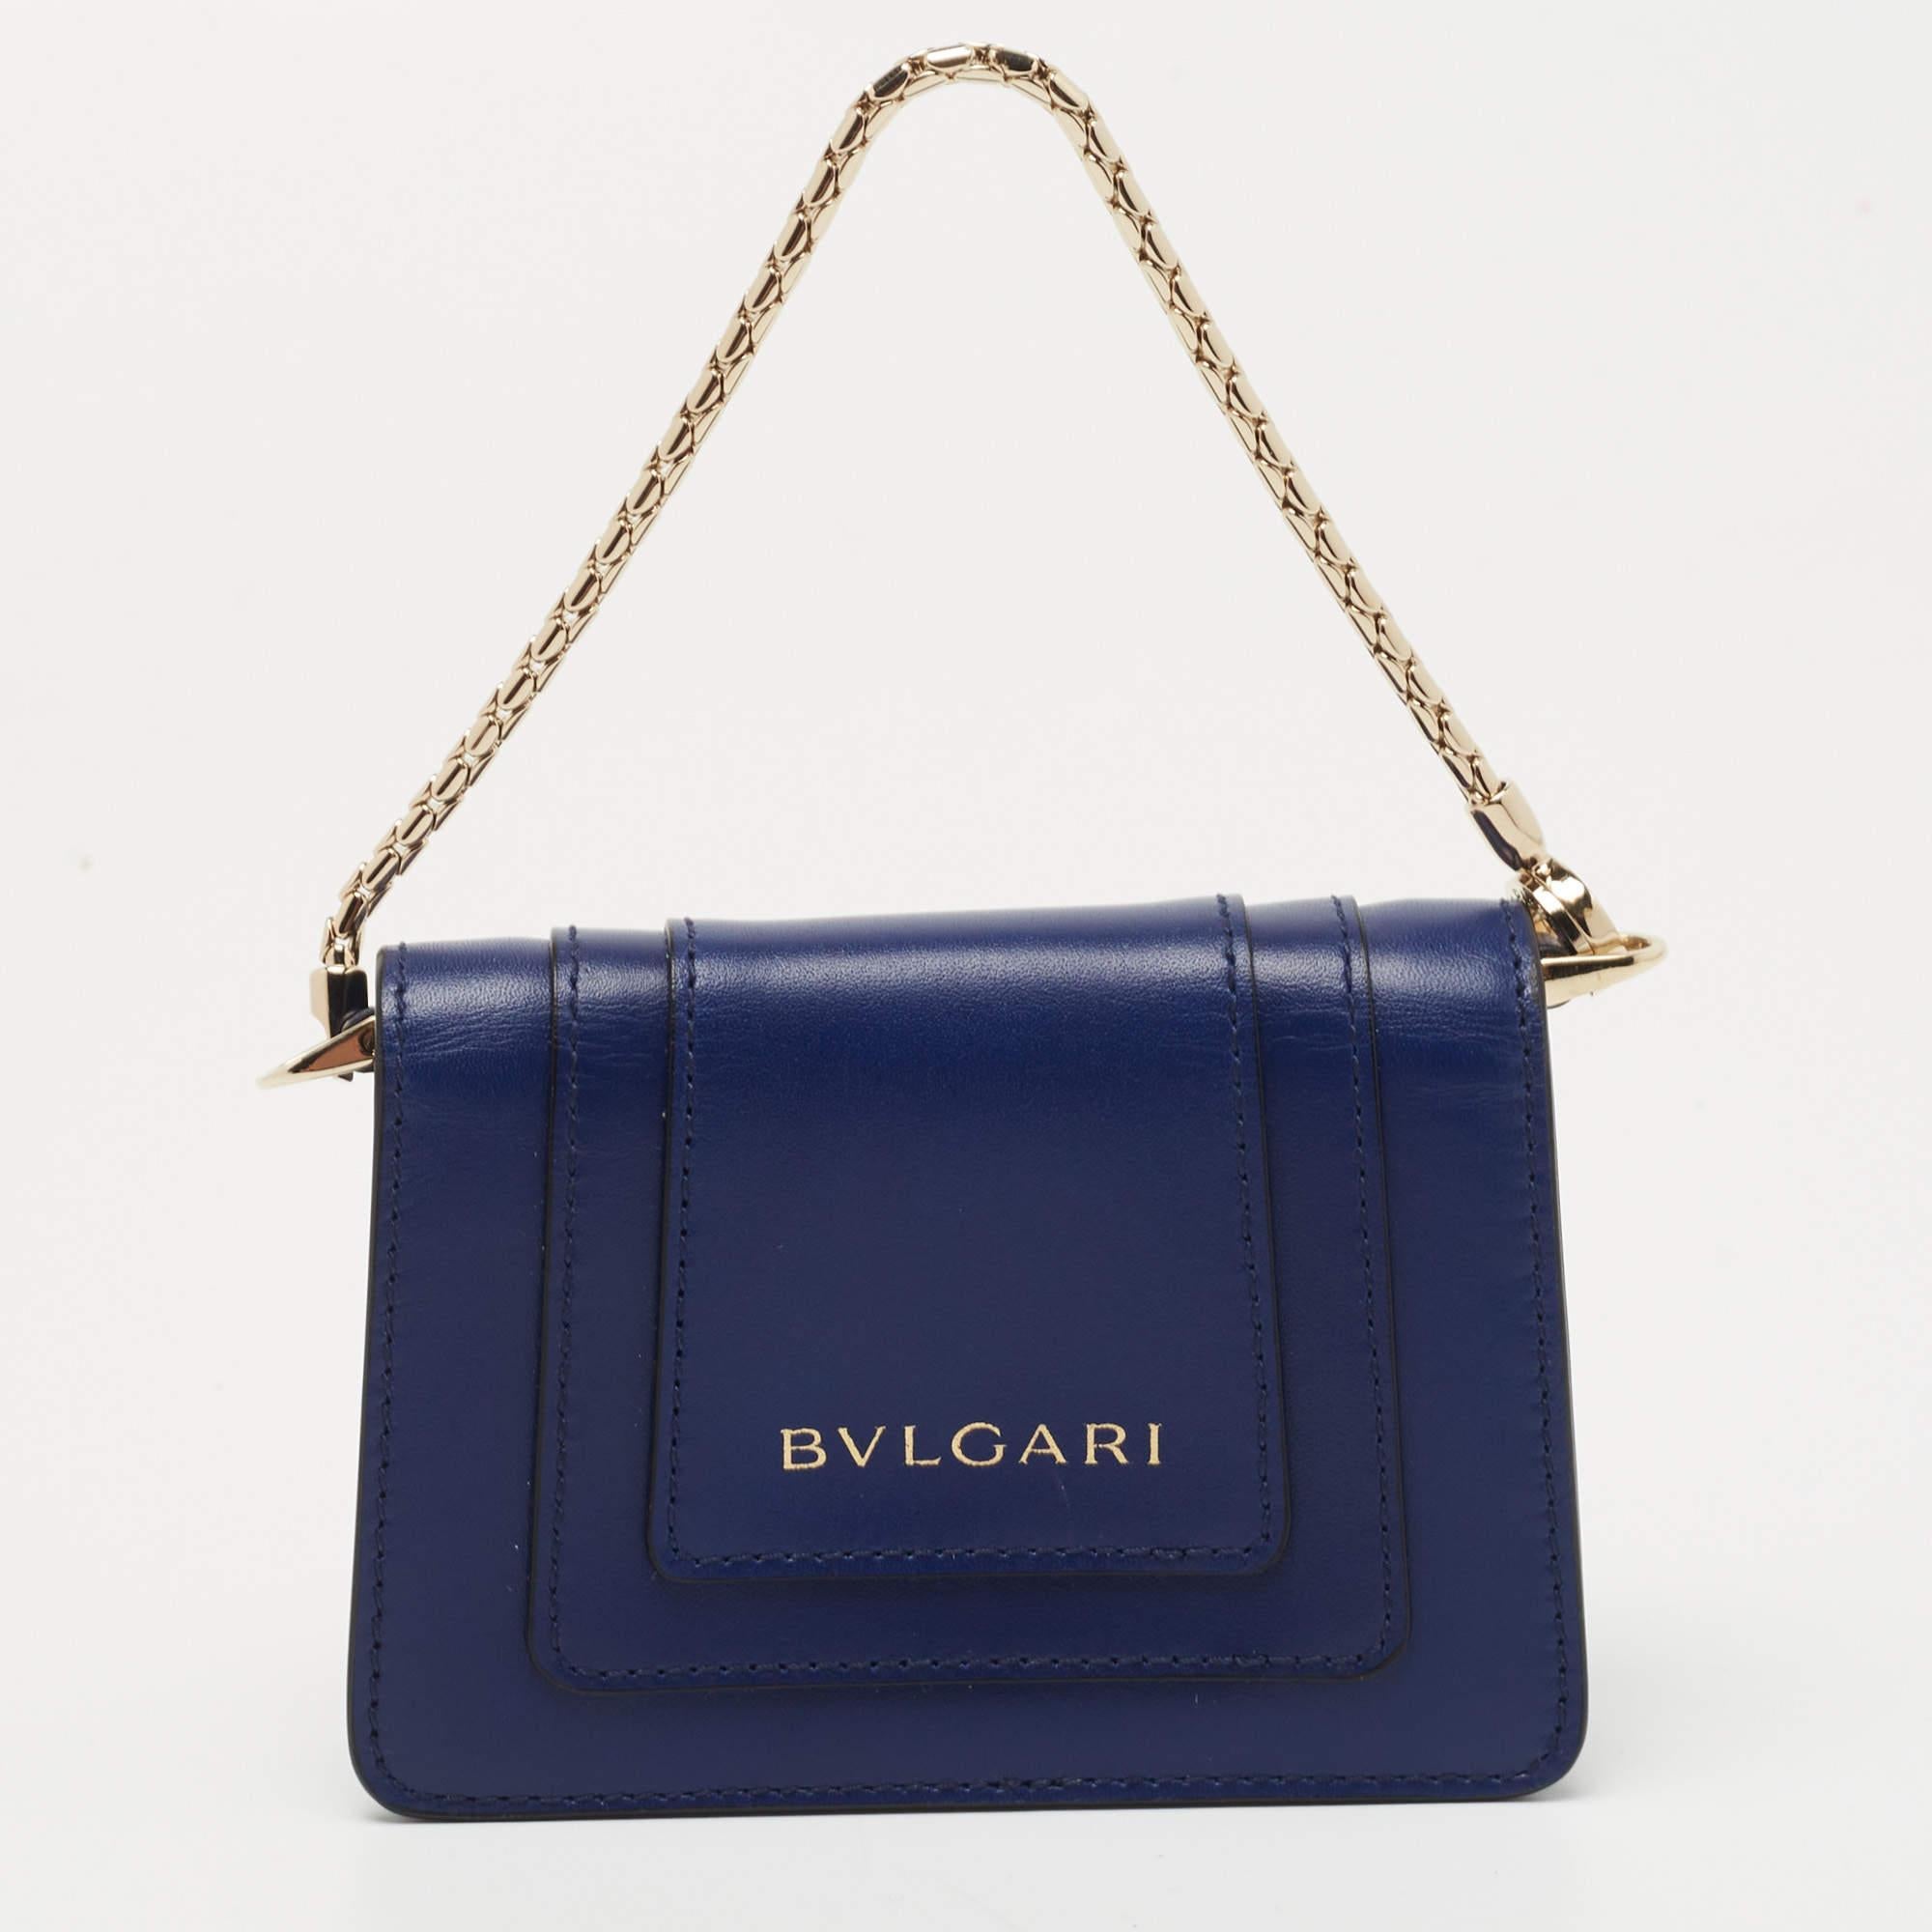 This Bvlgari accessory is an example of the brand's fine designs that are skillfully crafted to project a classic charm. It is a functional creation with an elevating appeal.

